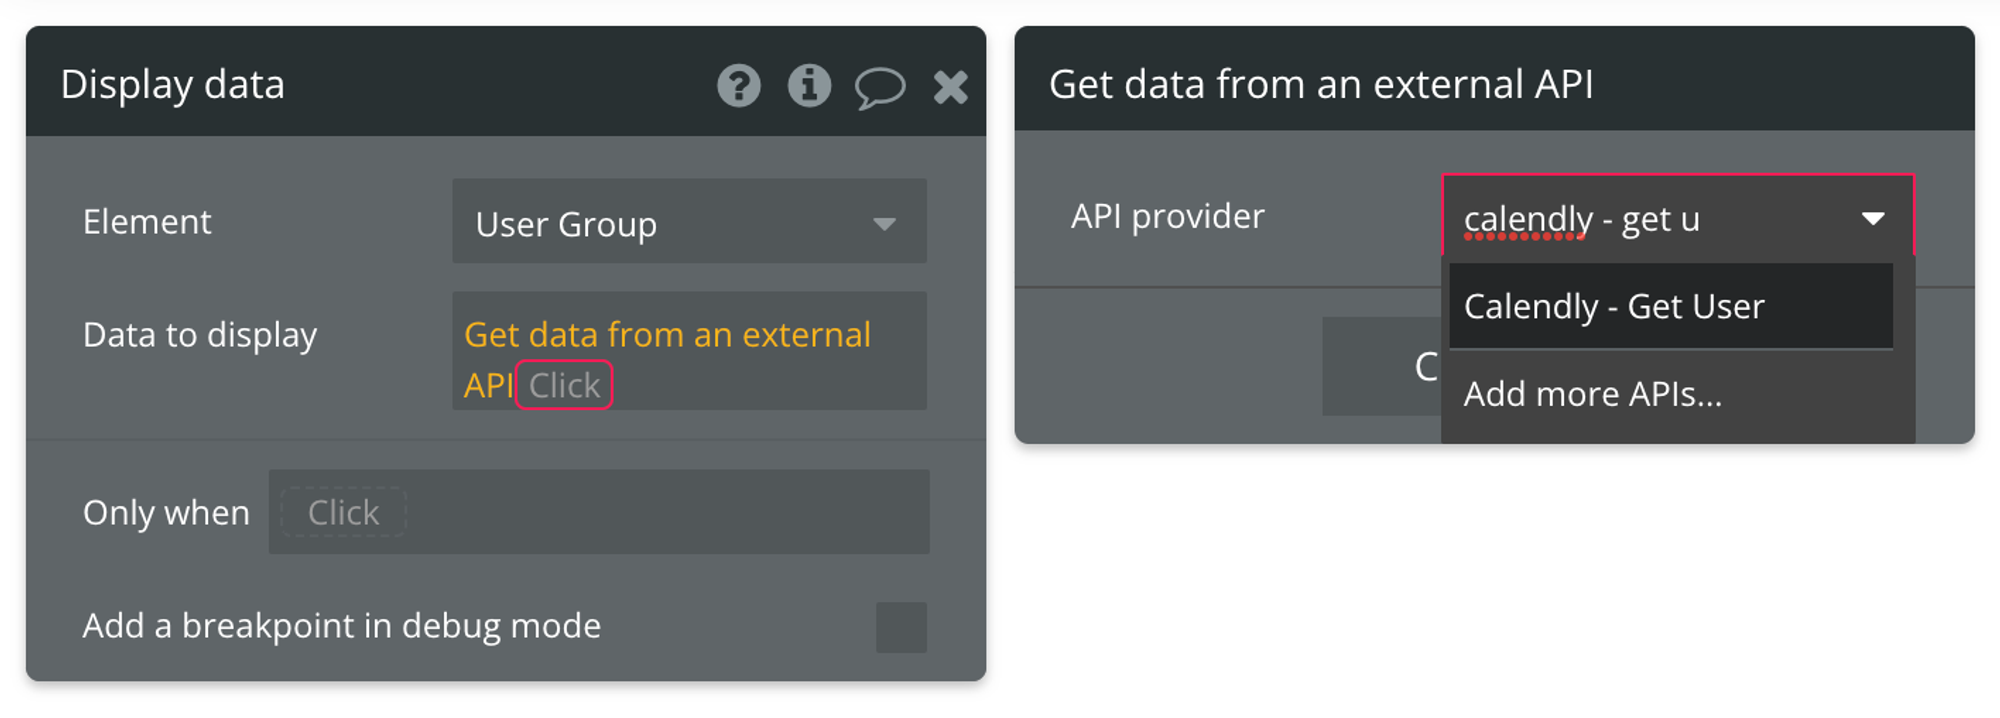 Select "Get data from external API" from the list of data sources, then find Calendly - Get User from the list of API providers